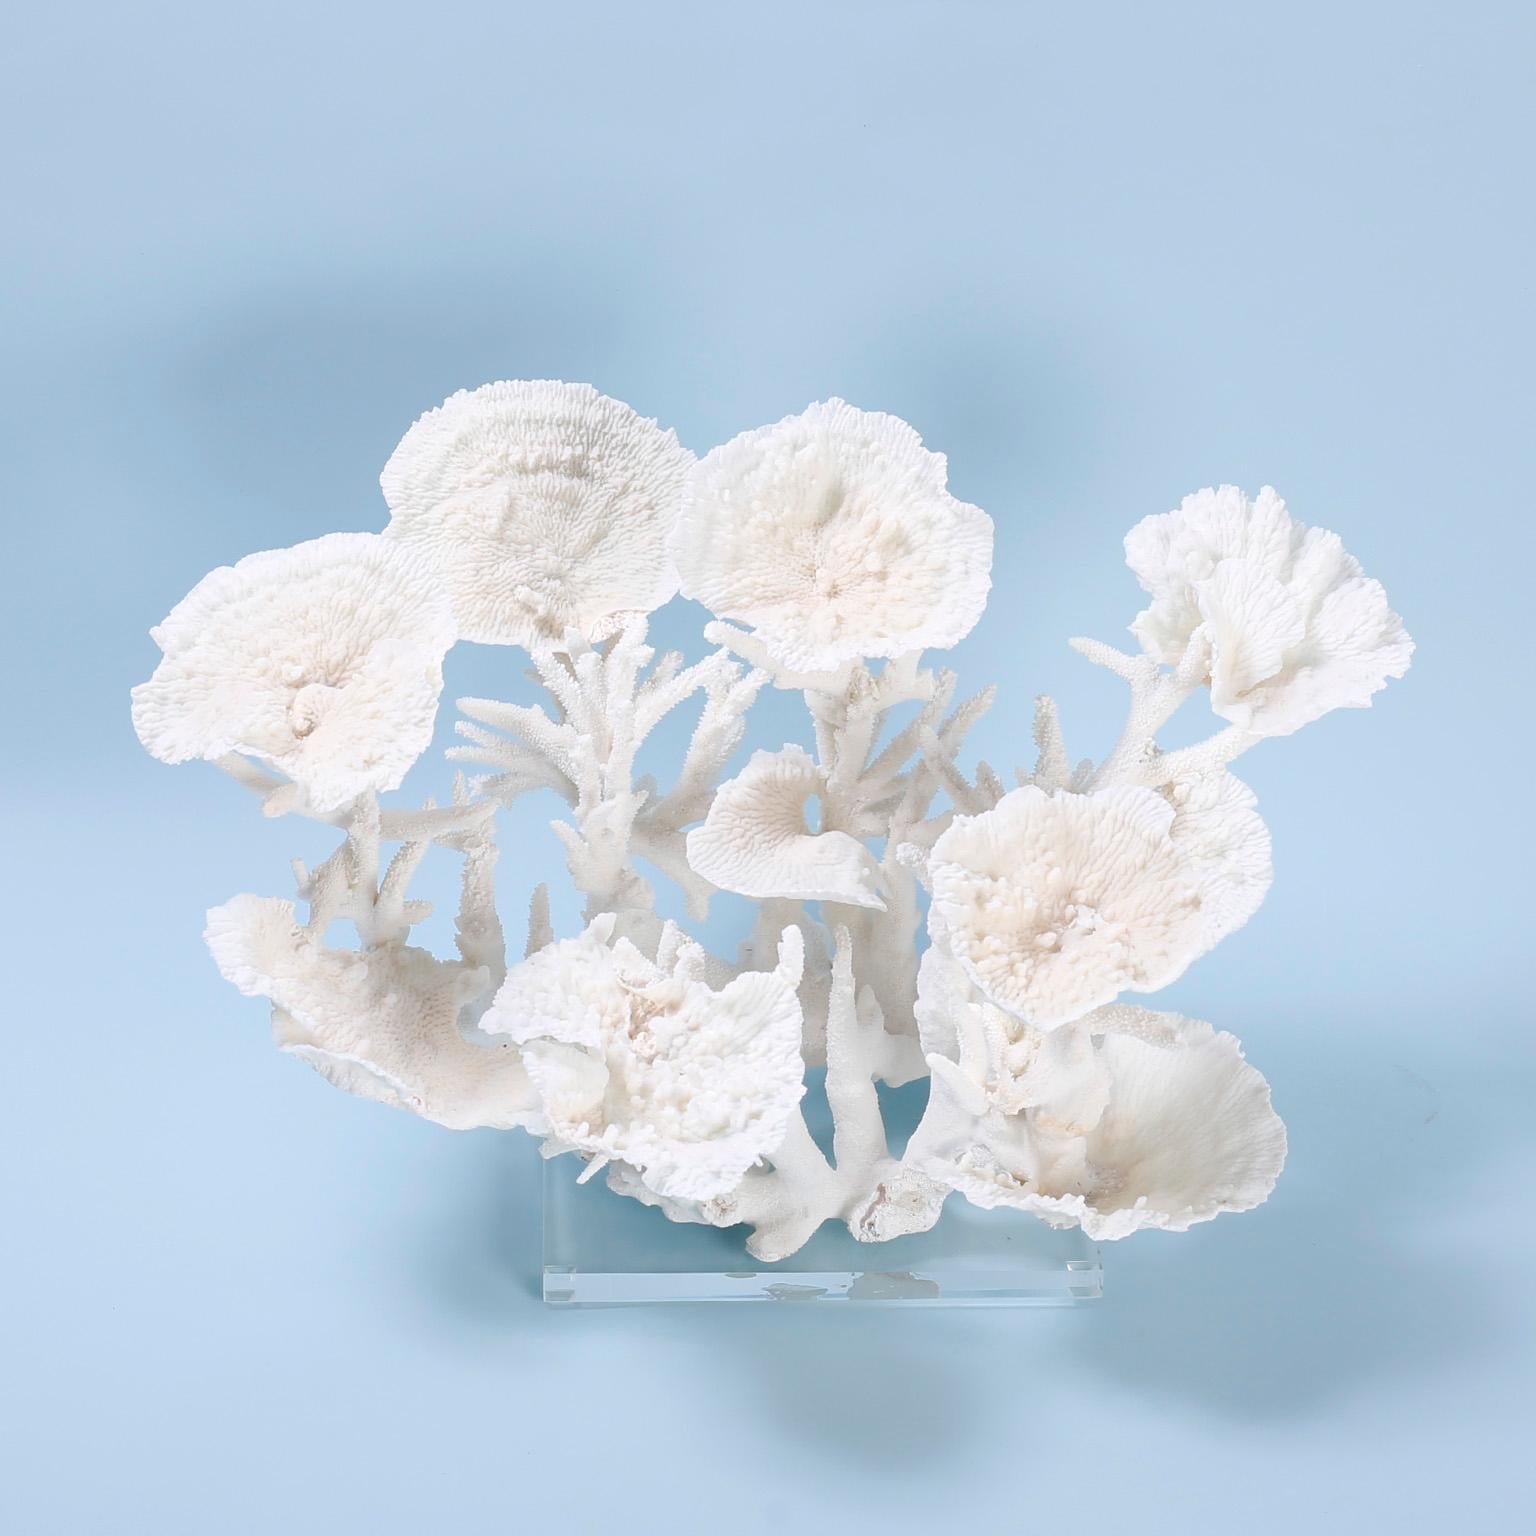 Large coral sculpture or assemblage with a dramatic structure crafted with staghorn and merulina coral in an unexpected composition with striking bleached color and Mother Nature inspired textural elements. Presented on a Lucite base.

Coral being